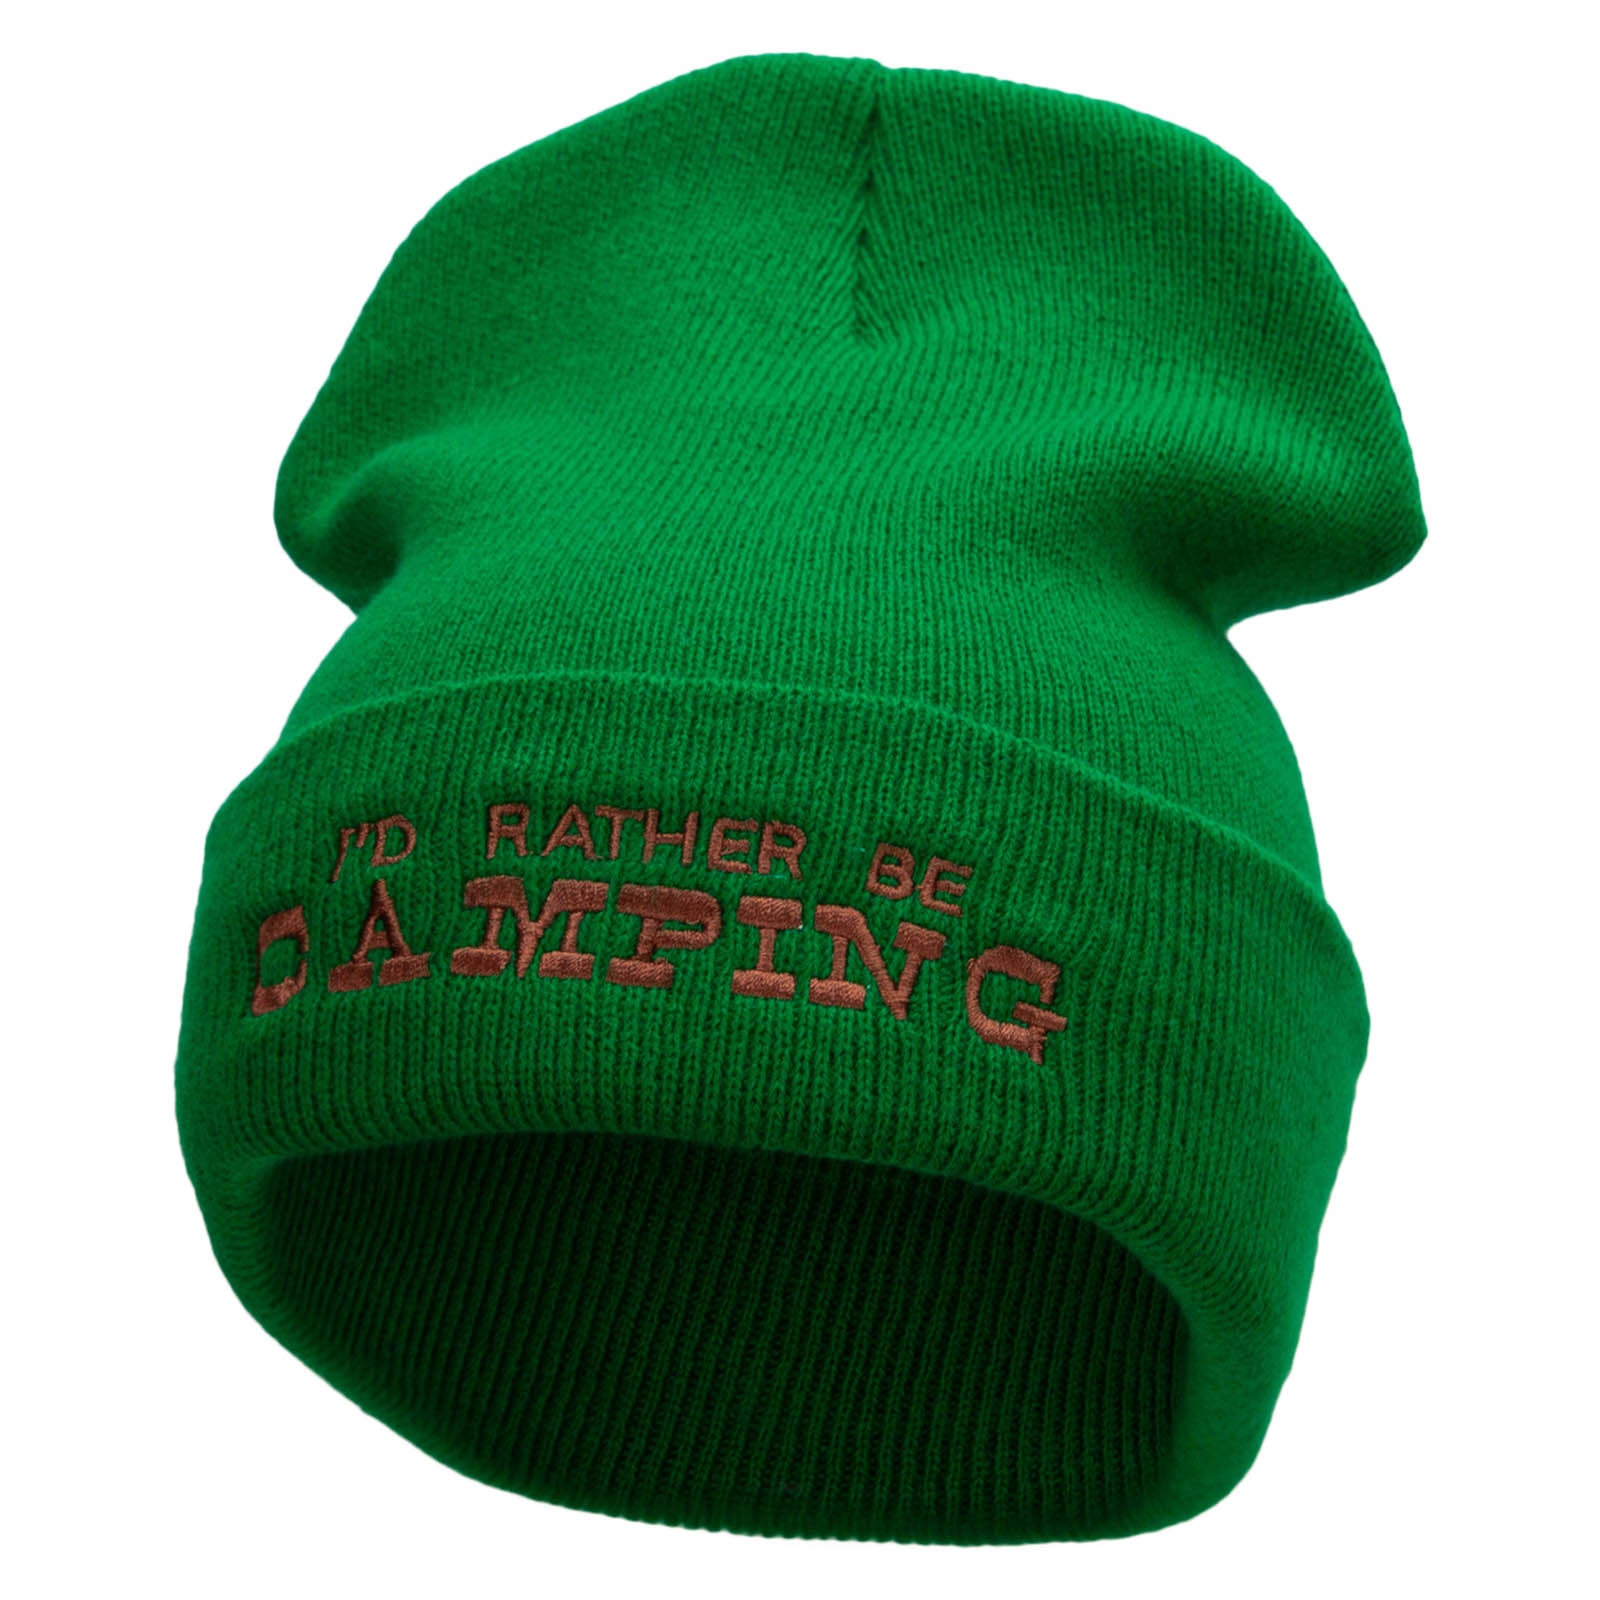 I&#039;d Rather Be Camping Embroidered 12 Inch Solid Long Beanie Made in USA - Kelly Green OSFM